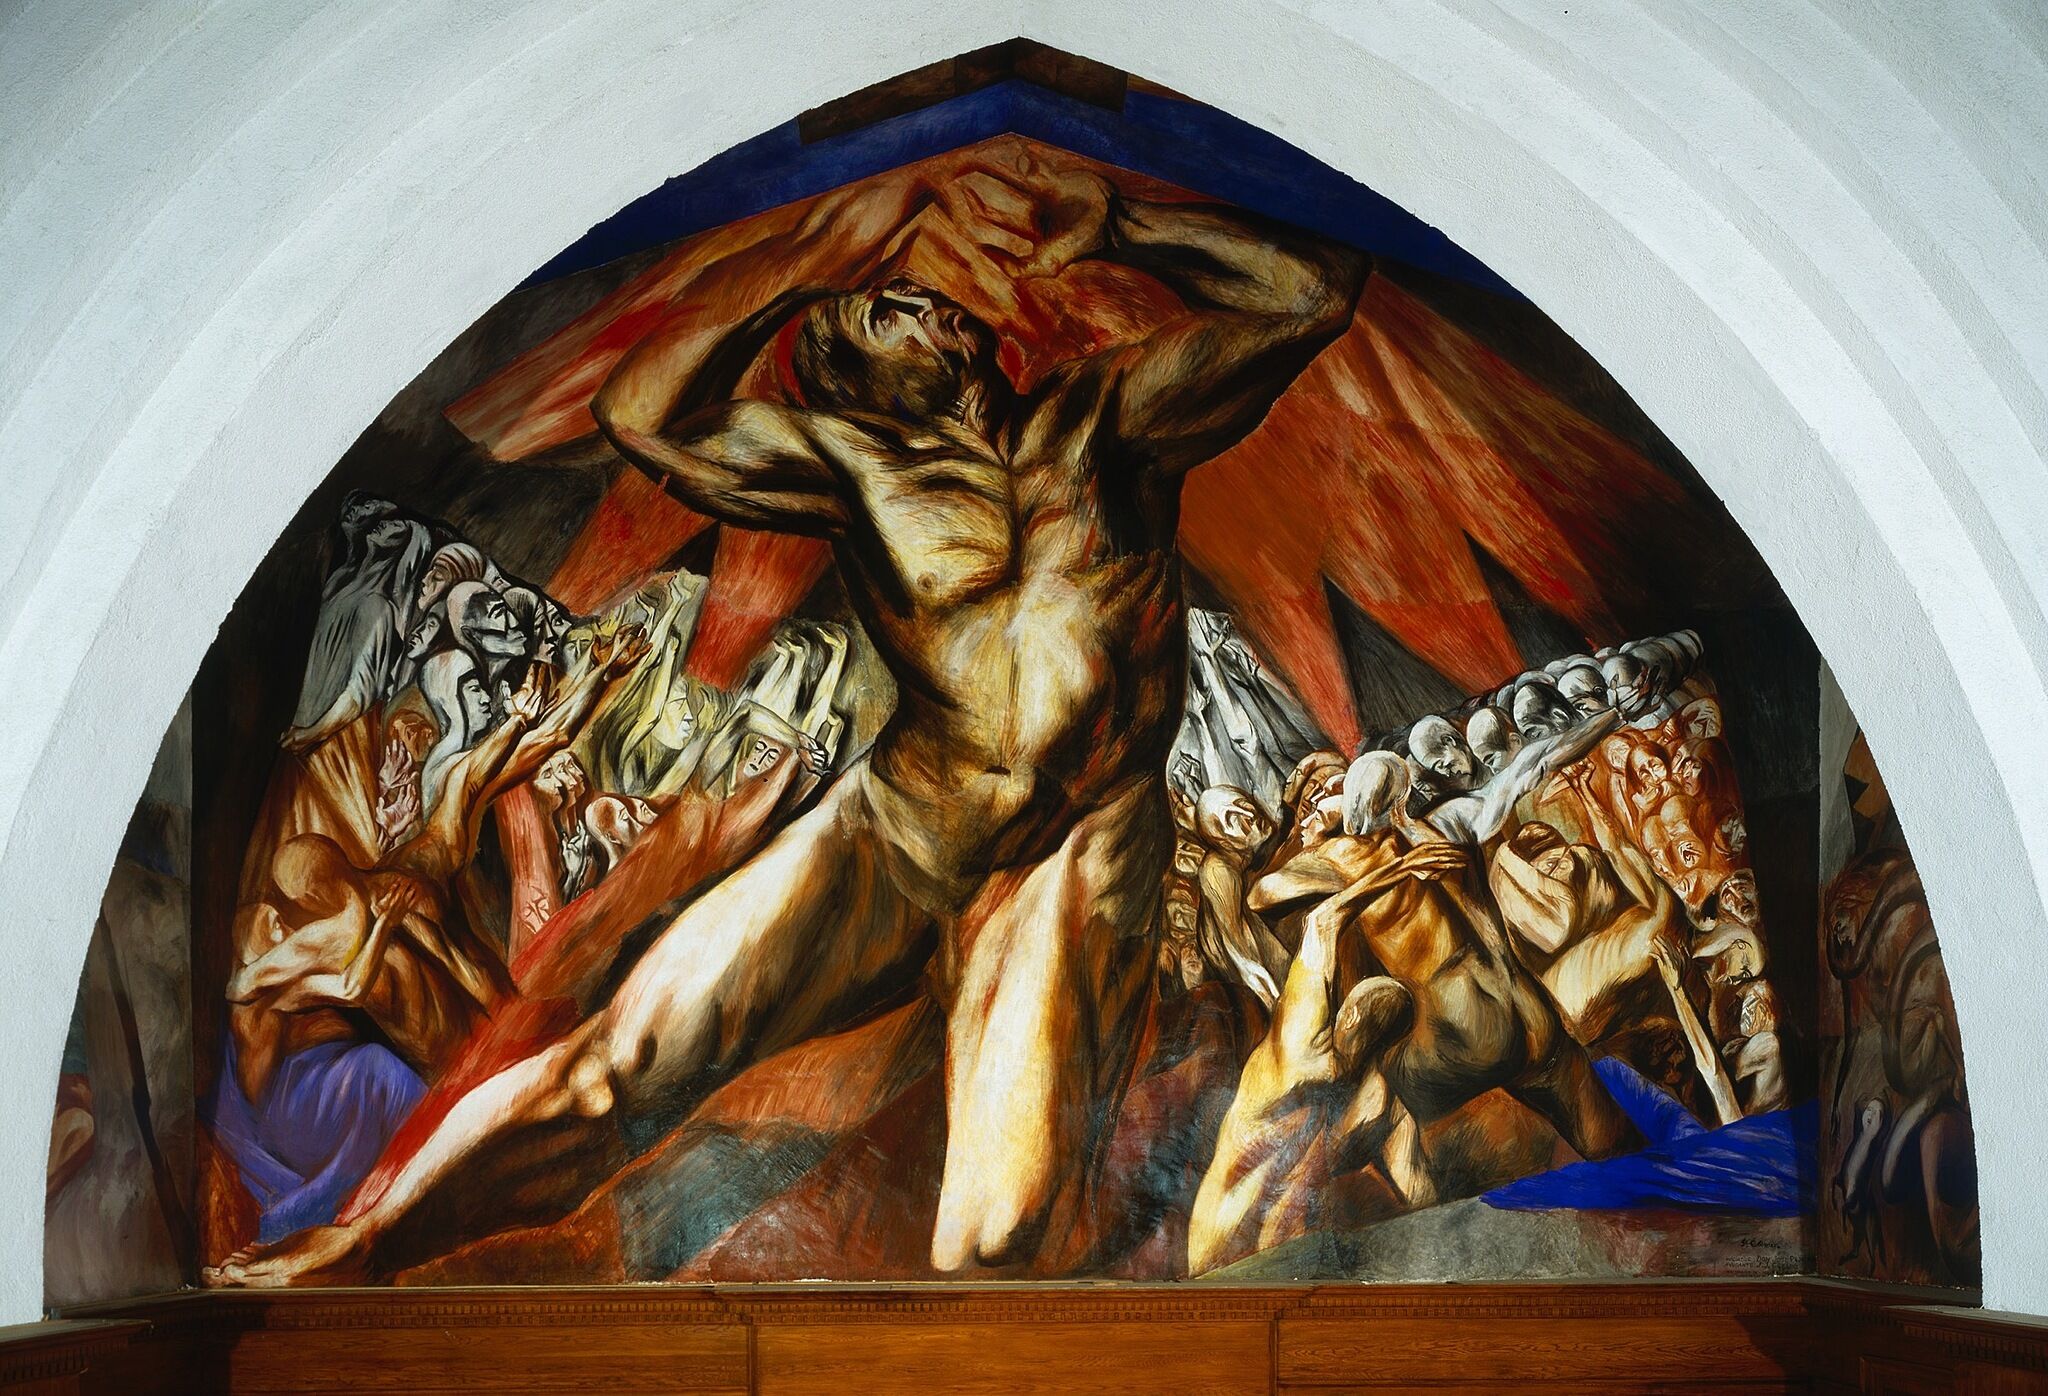 A photo of a mural depicting a tortured-looking man.